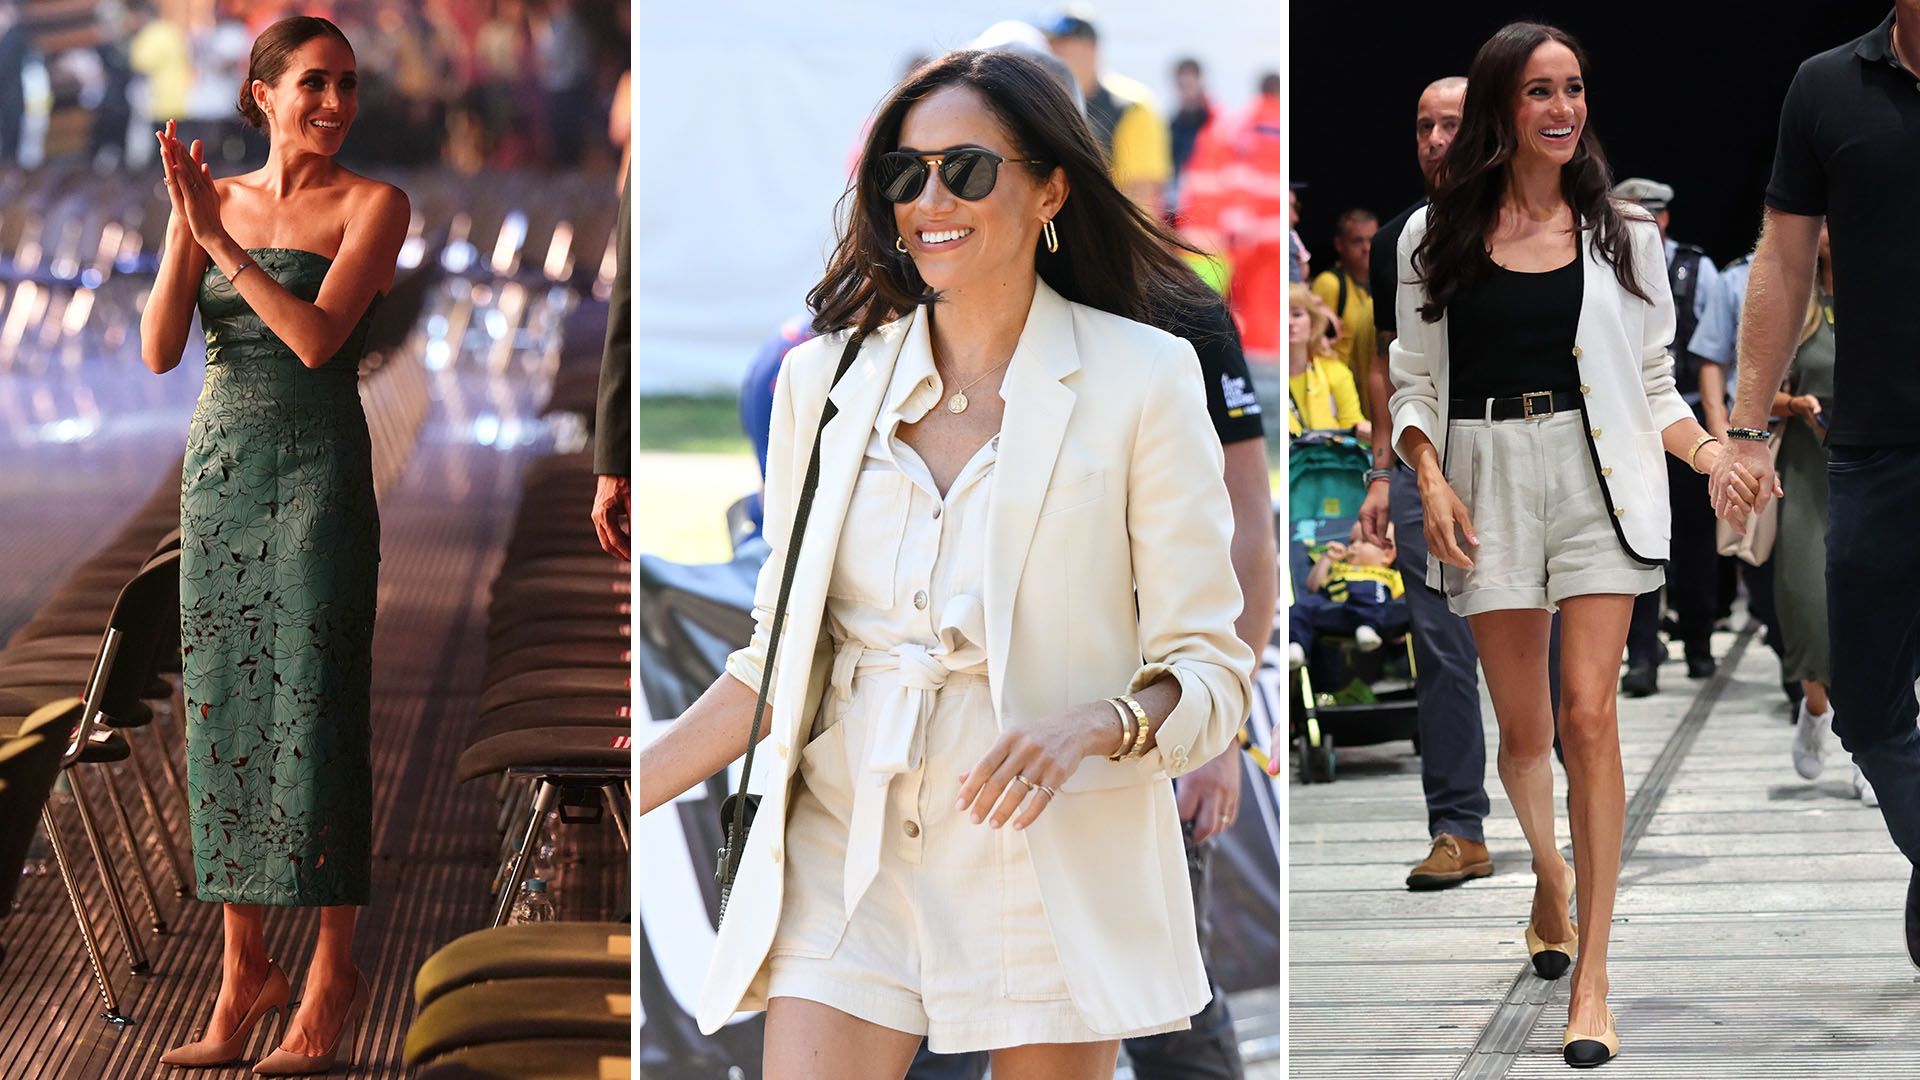 Meghan Markle Invictus Games outfits 